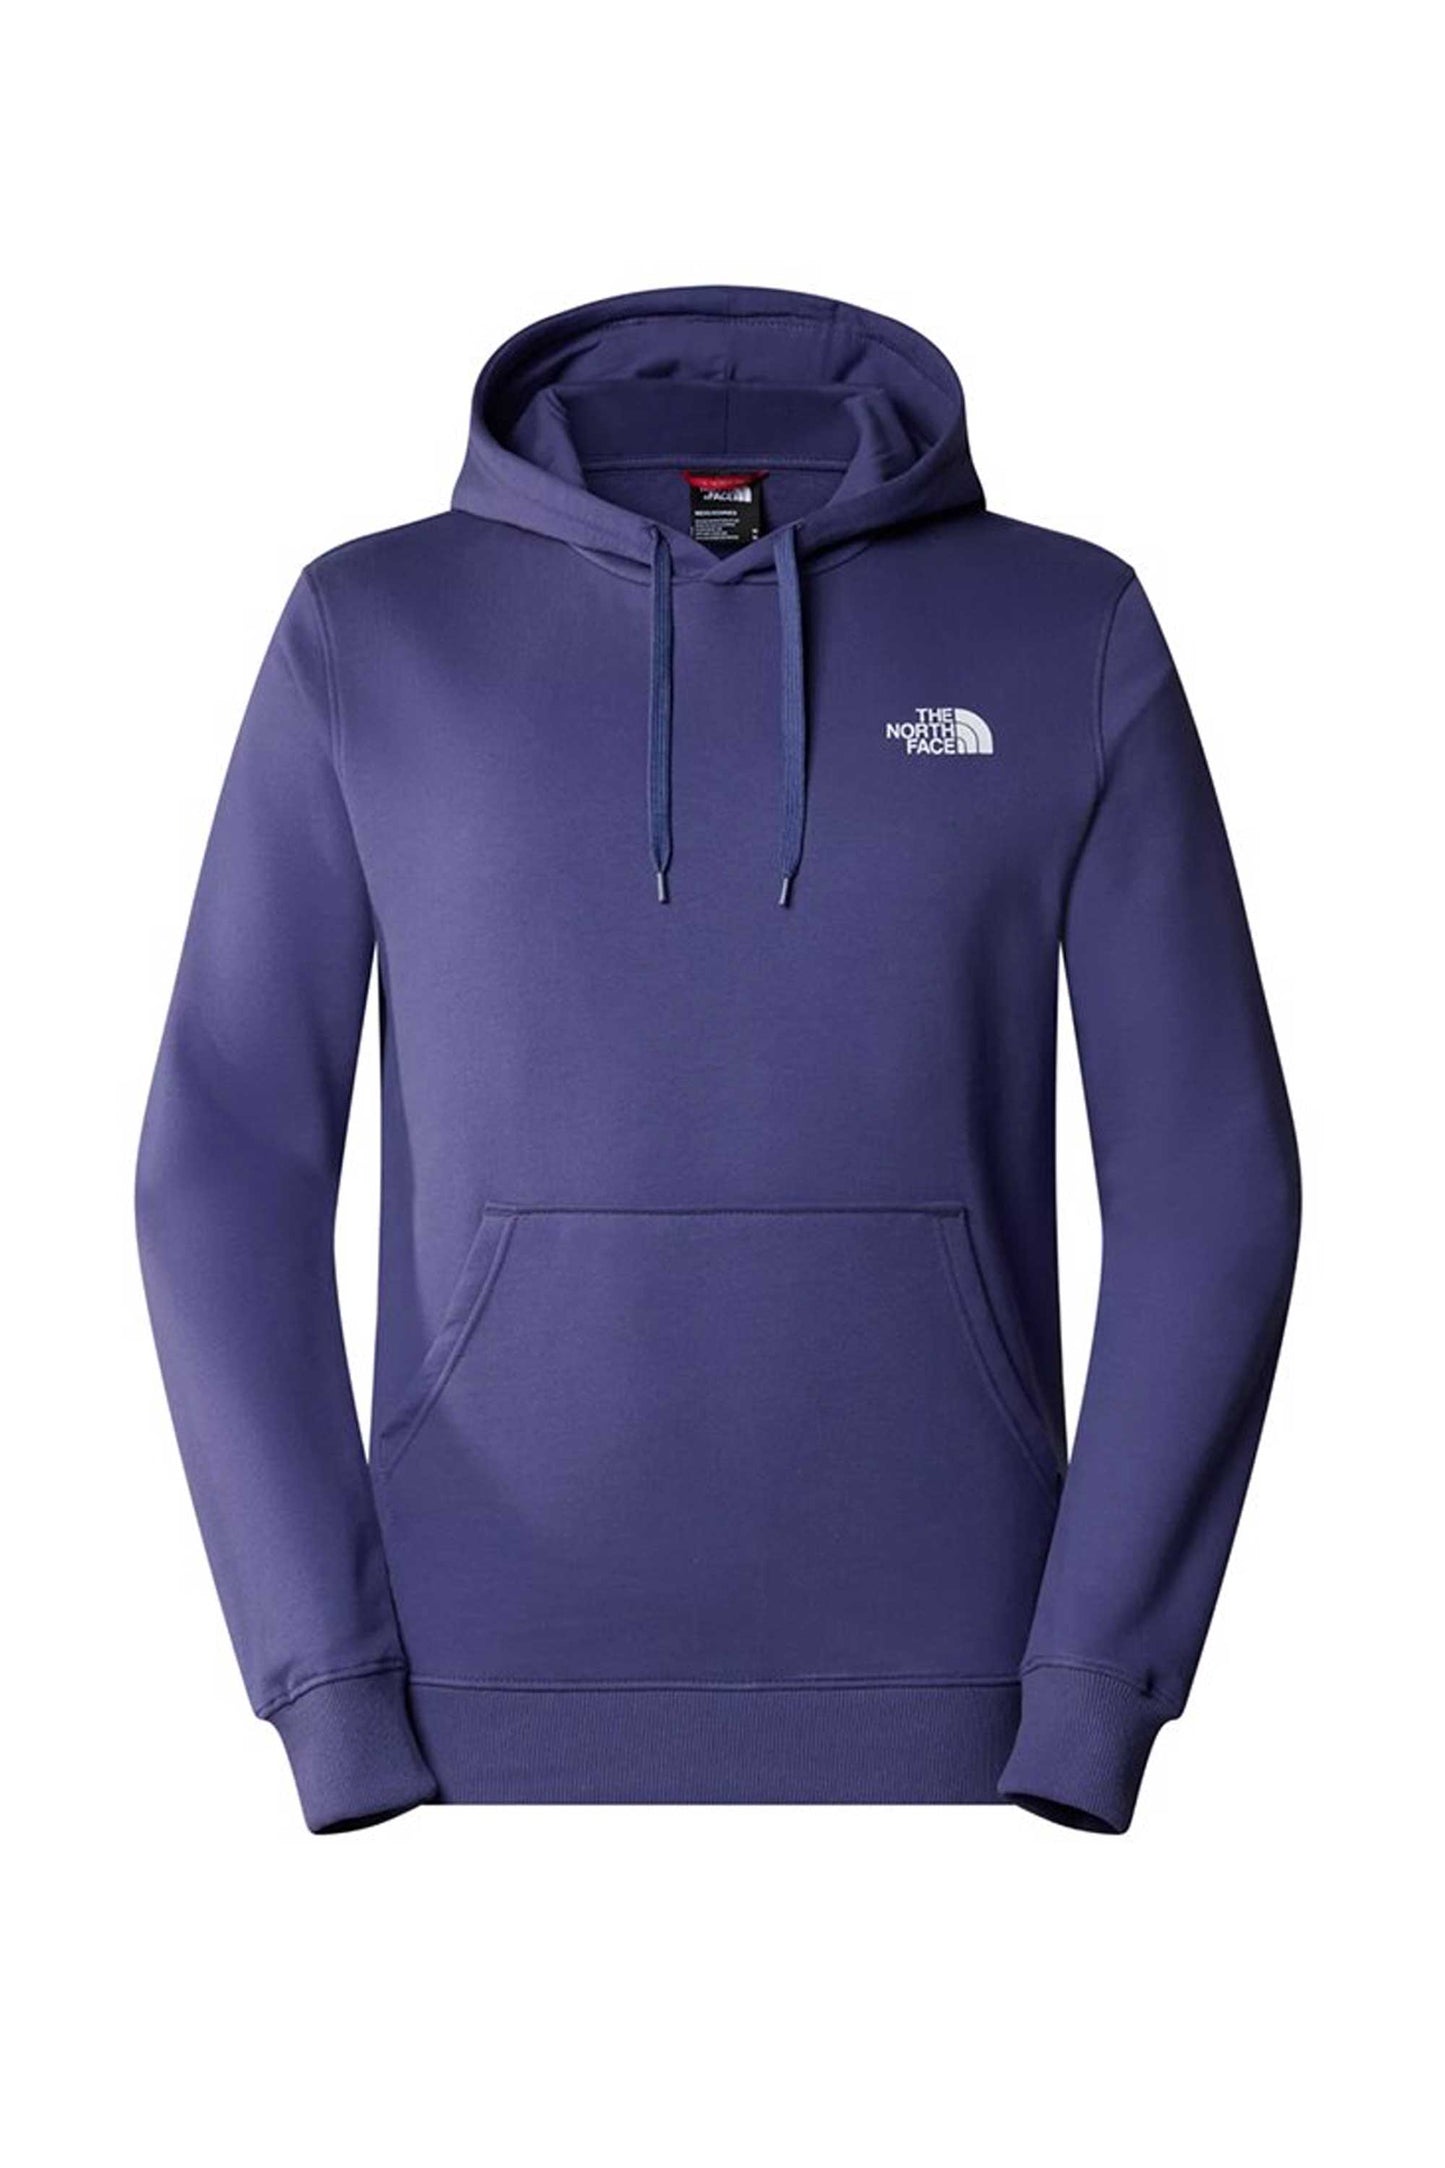 Pukas-Surf-Shop-the-north-face-hoodie-man-simple-dom-cave-blue